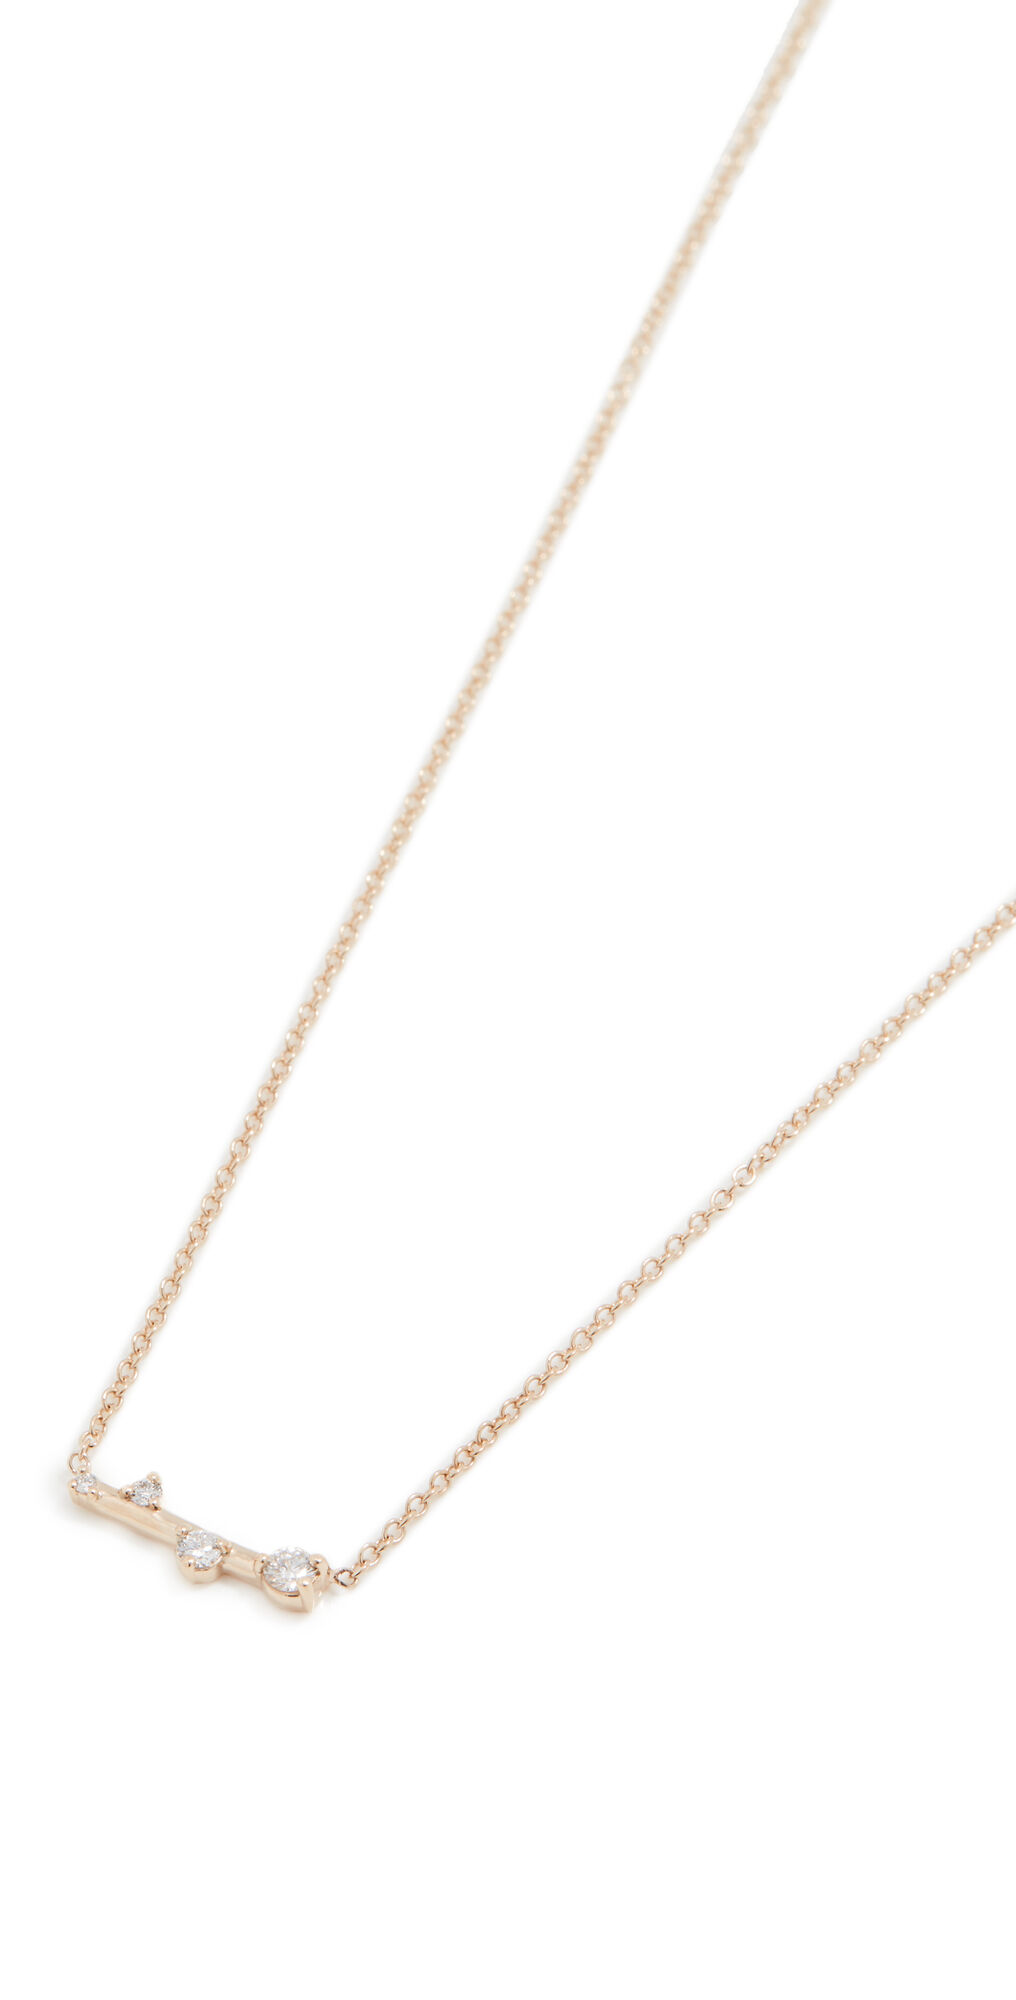 Chicco Zoe Chicco Prong Diamonds Necklace Gold One Size  Gold  size:One Size